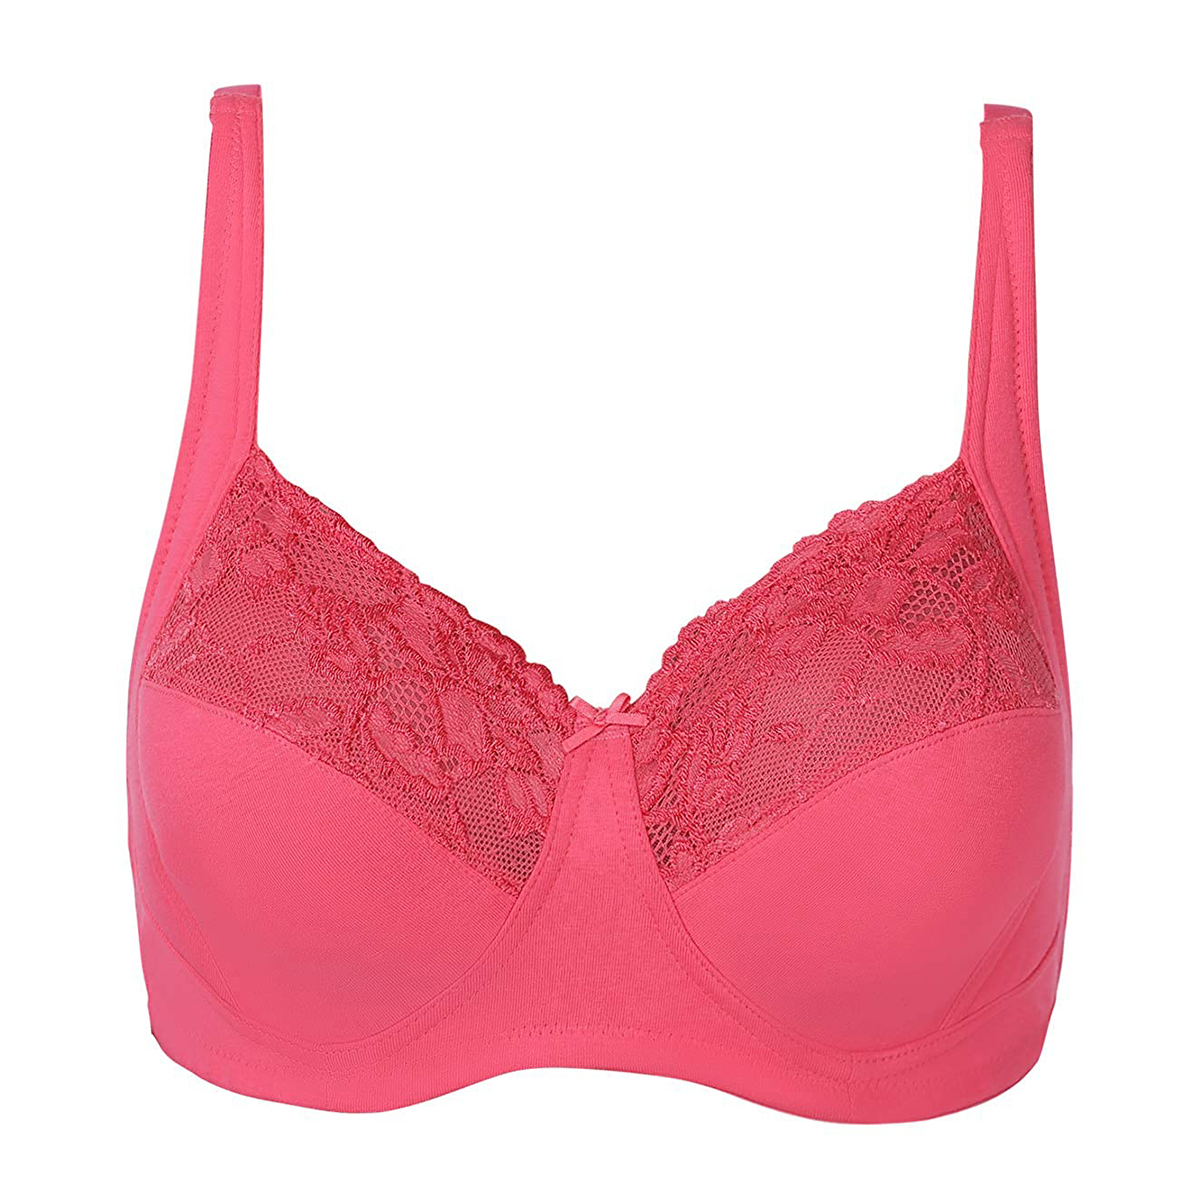 Blossom Plus Size Softly Seamed Wirefree Bra - Raspberry - C Cup